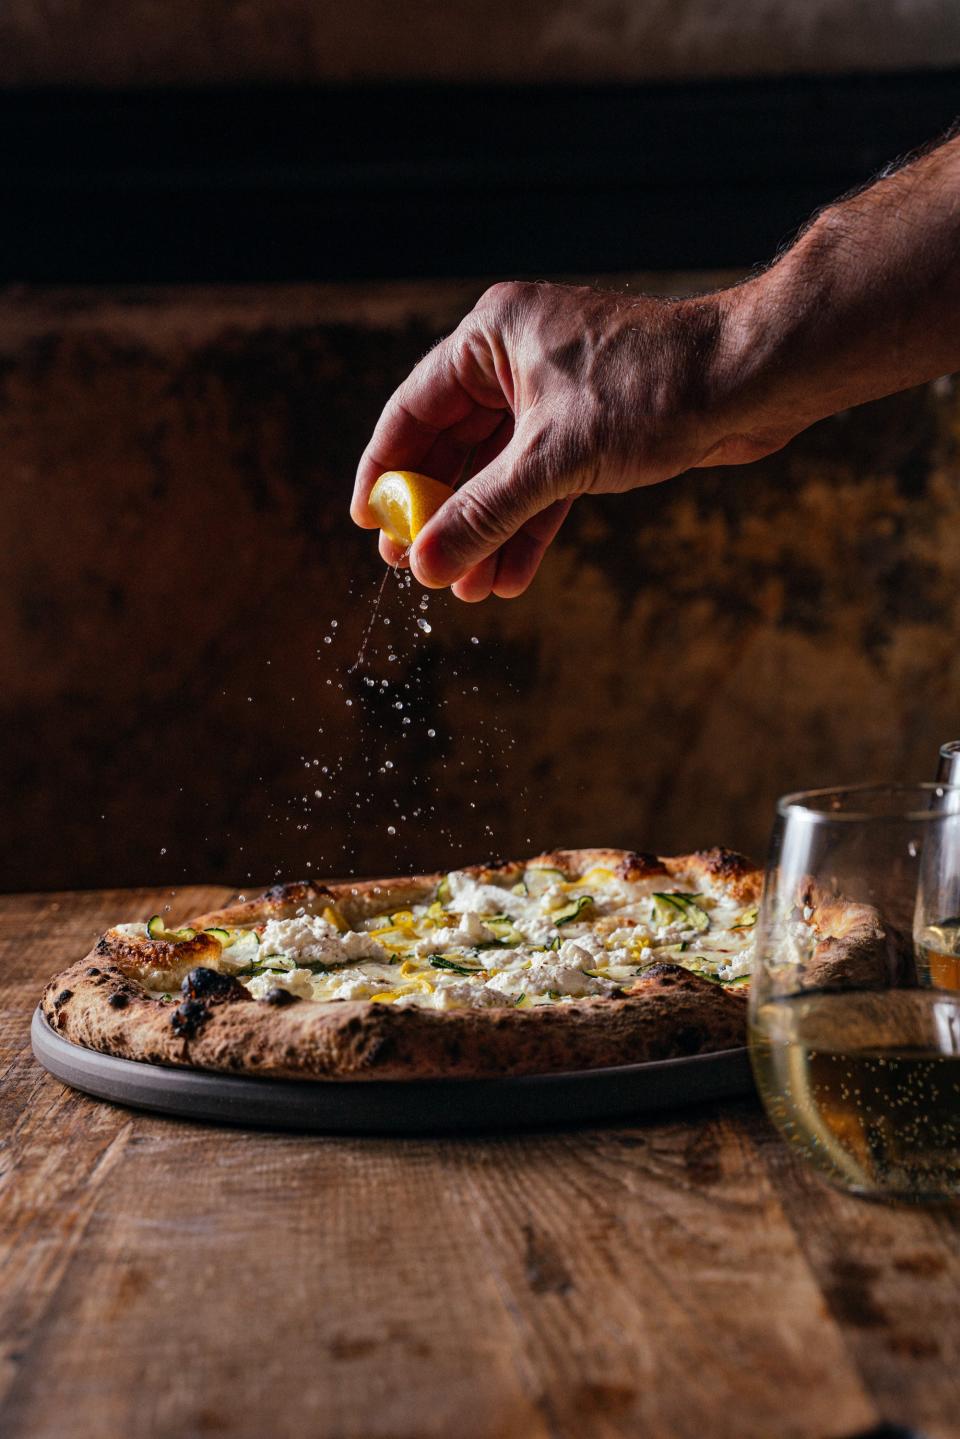 Dan Richer of Razza in Jersey City has penned a pizza cookbook